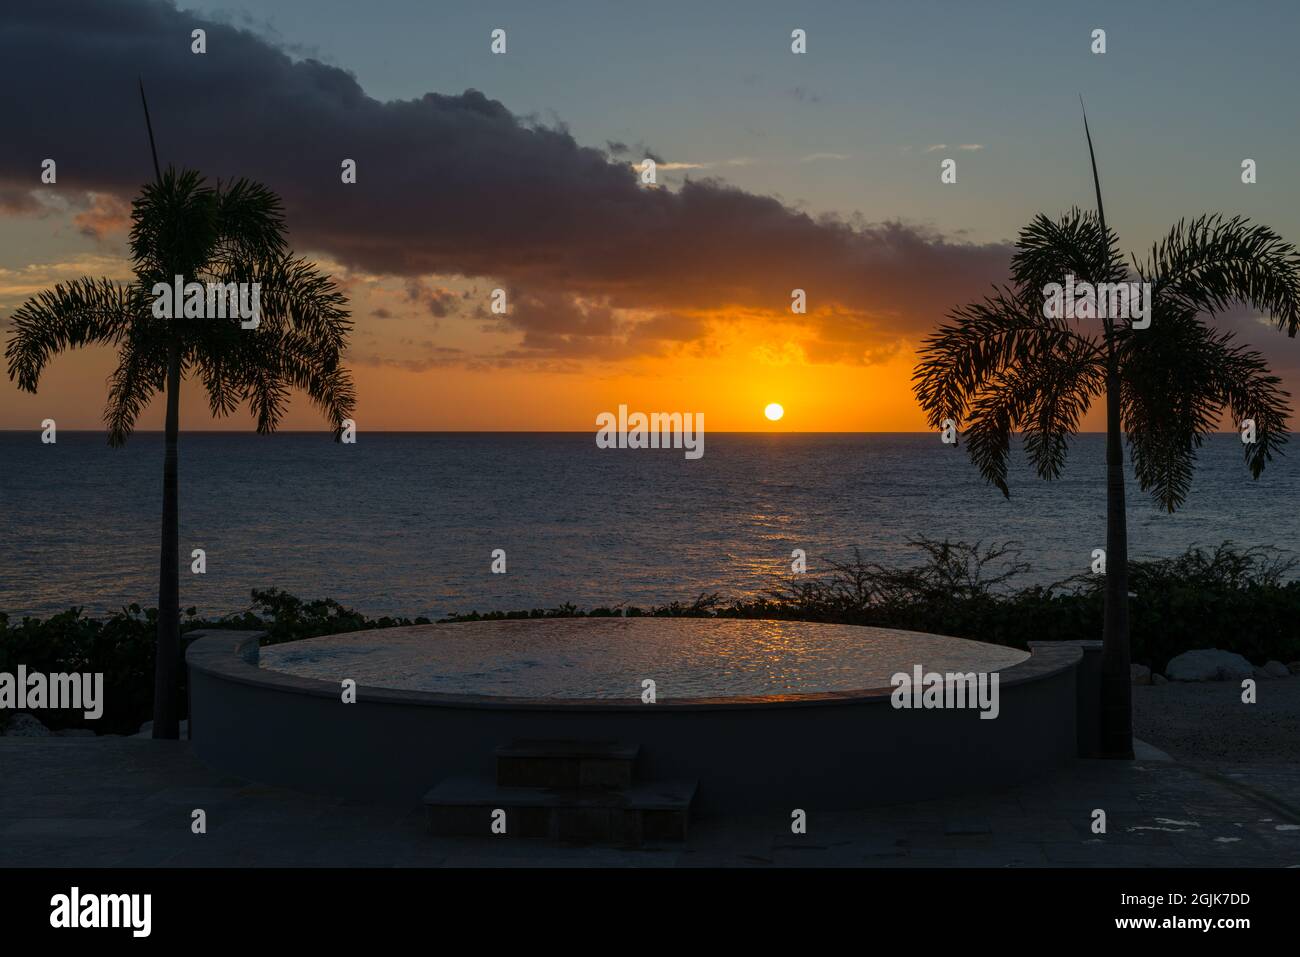 Summer and winter vacation destination, views of Curacao island, with private swimming poo, tropical flora and blue water of Carribean sea Stock Photo